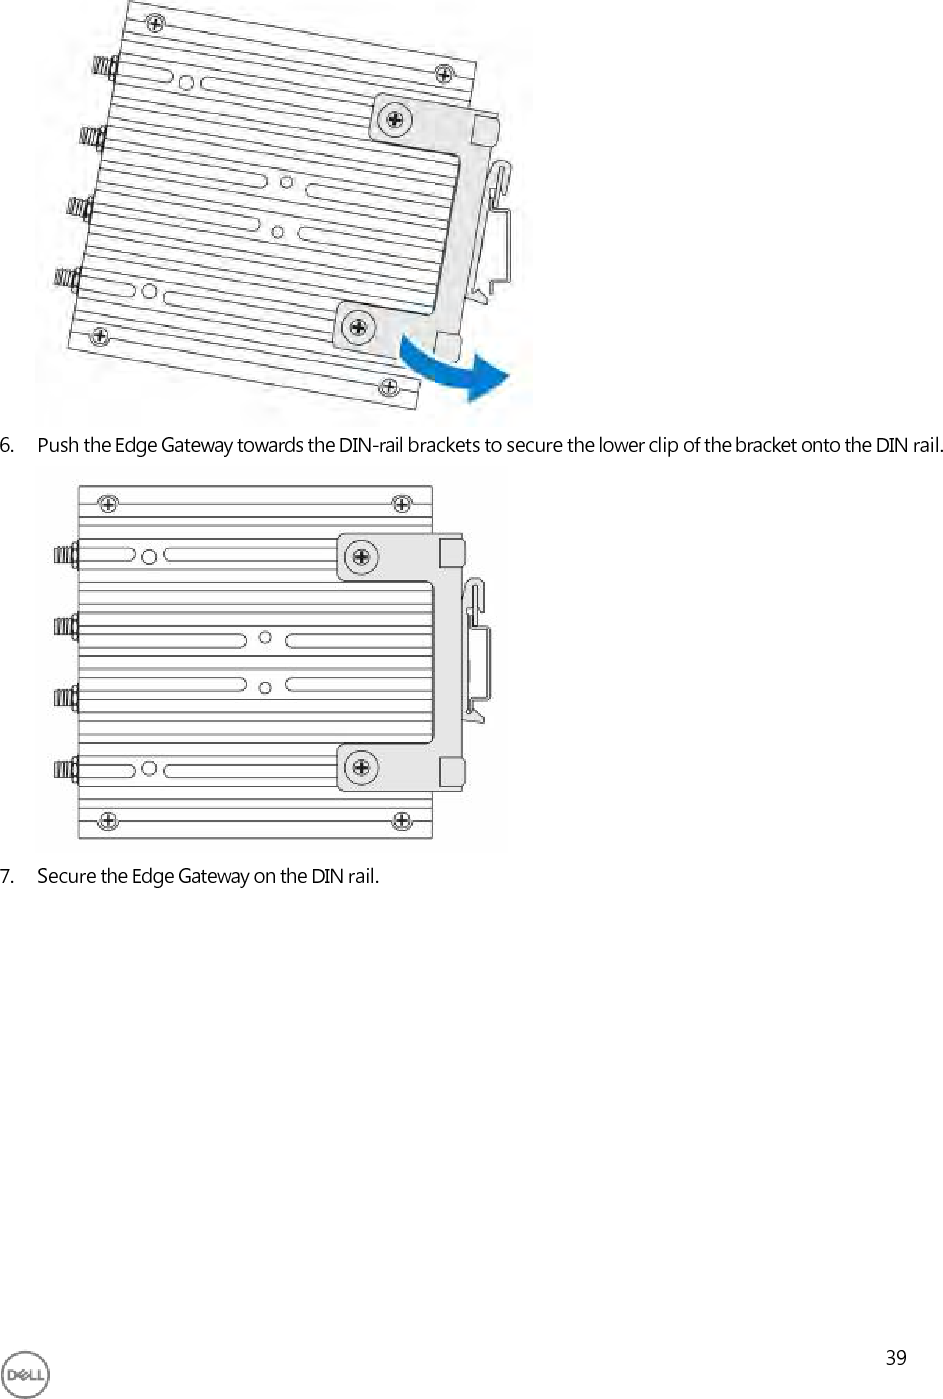                       6. Push the Edge Gateway towards the DIN-rail brackets to secure the lower clip of the bracket onto the DIN rail.                 7. Secure the Edge Gateway on the DIN rail.                   39